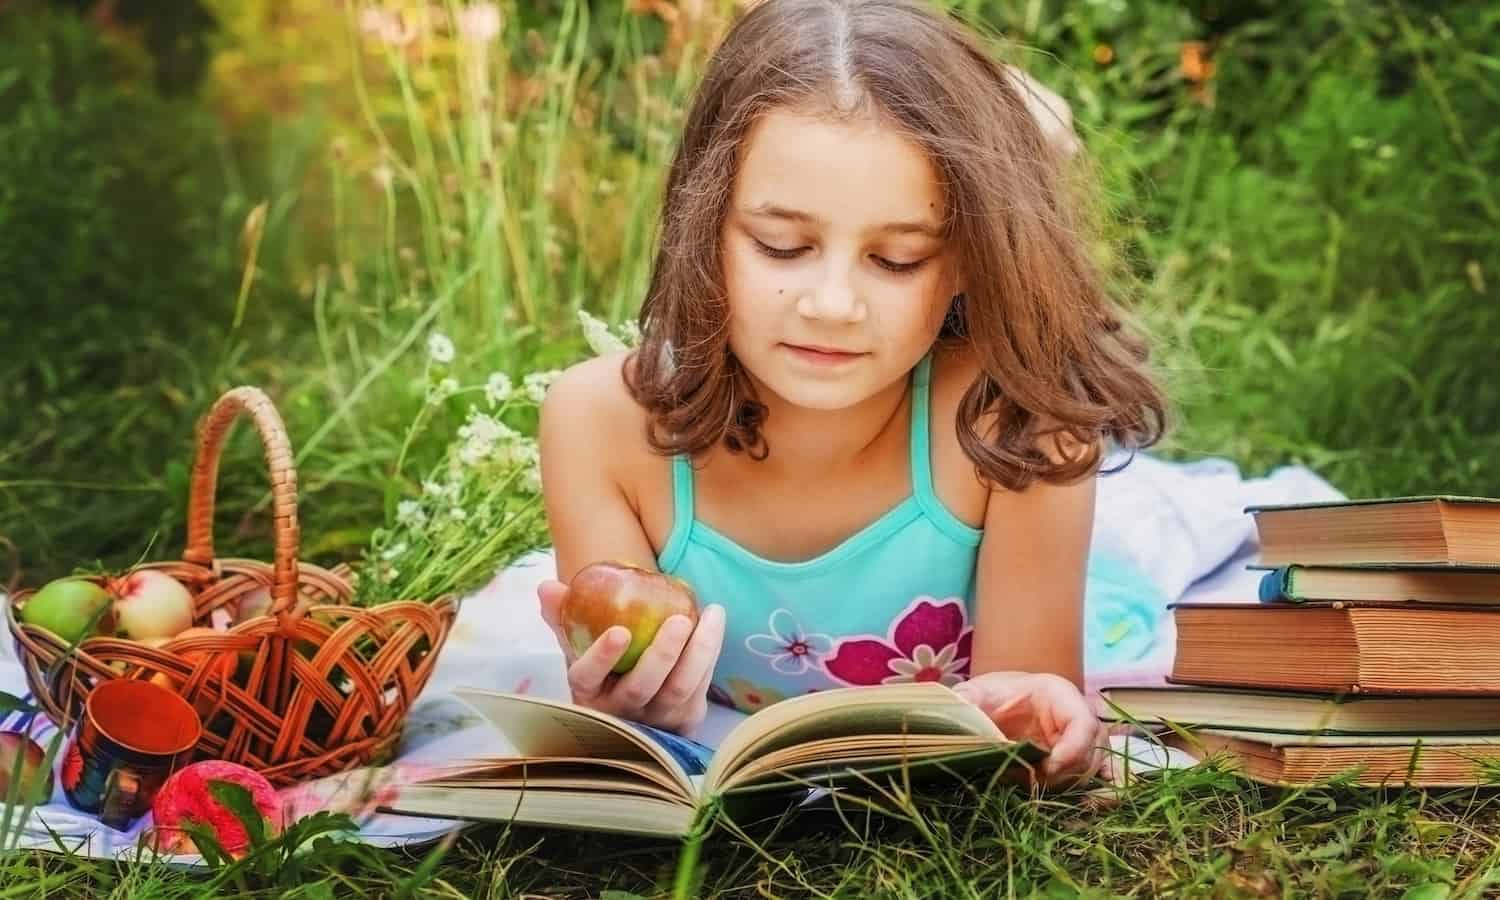 Food Tank has compiled a list of 25 children’s books to nourish young minds and grow future foodies.